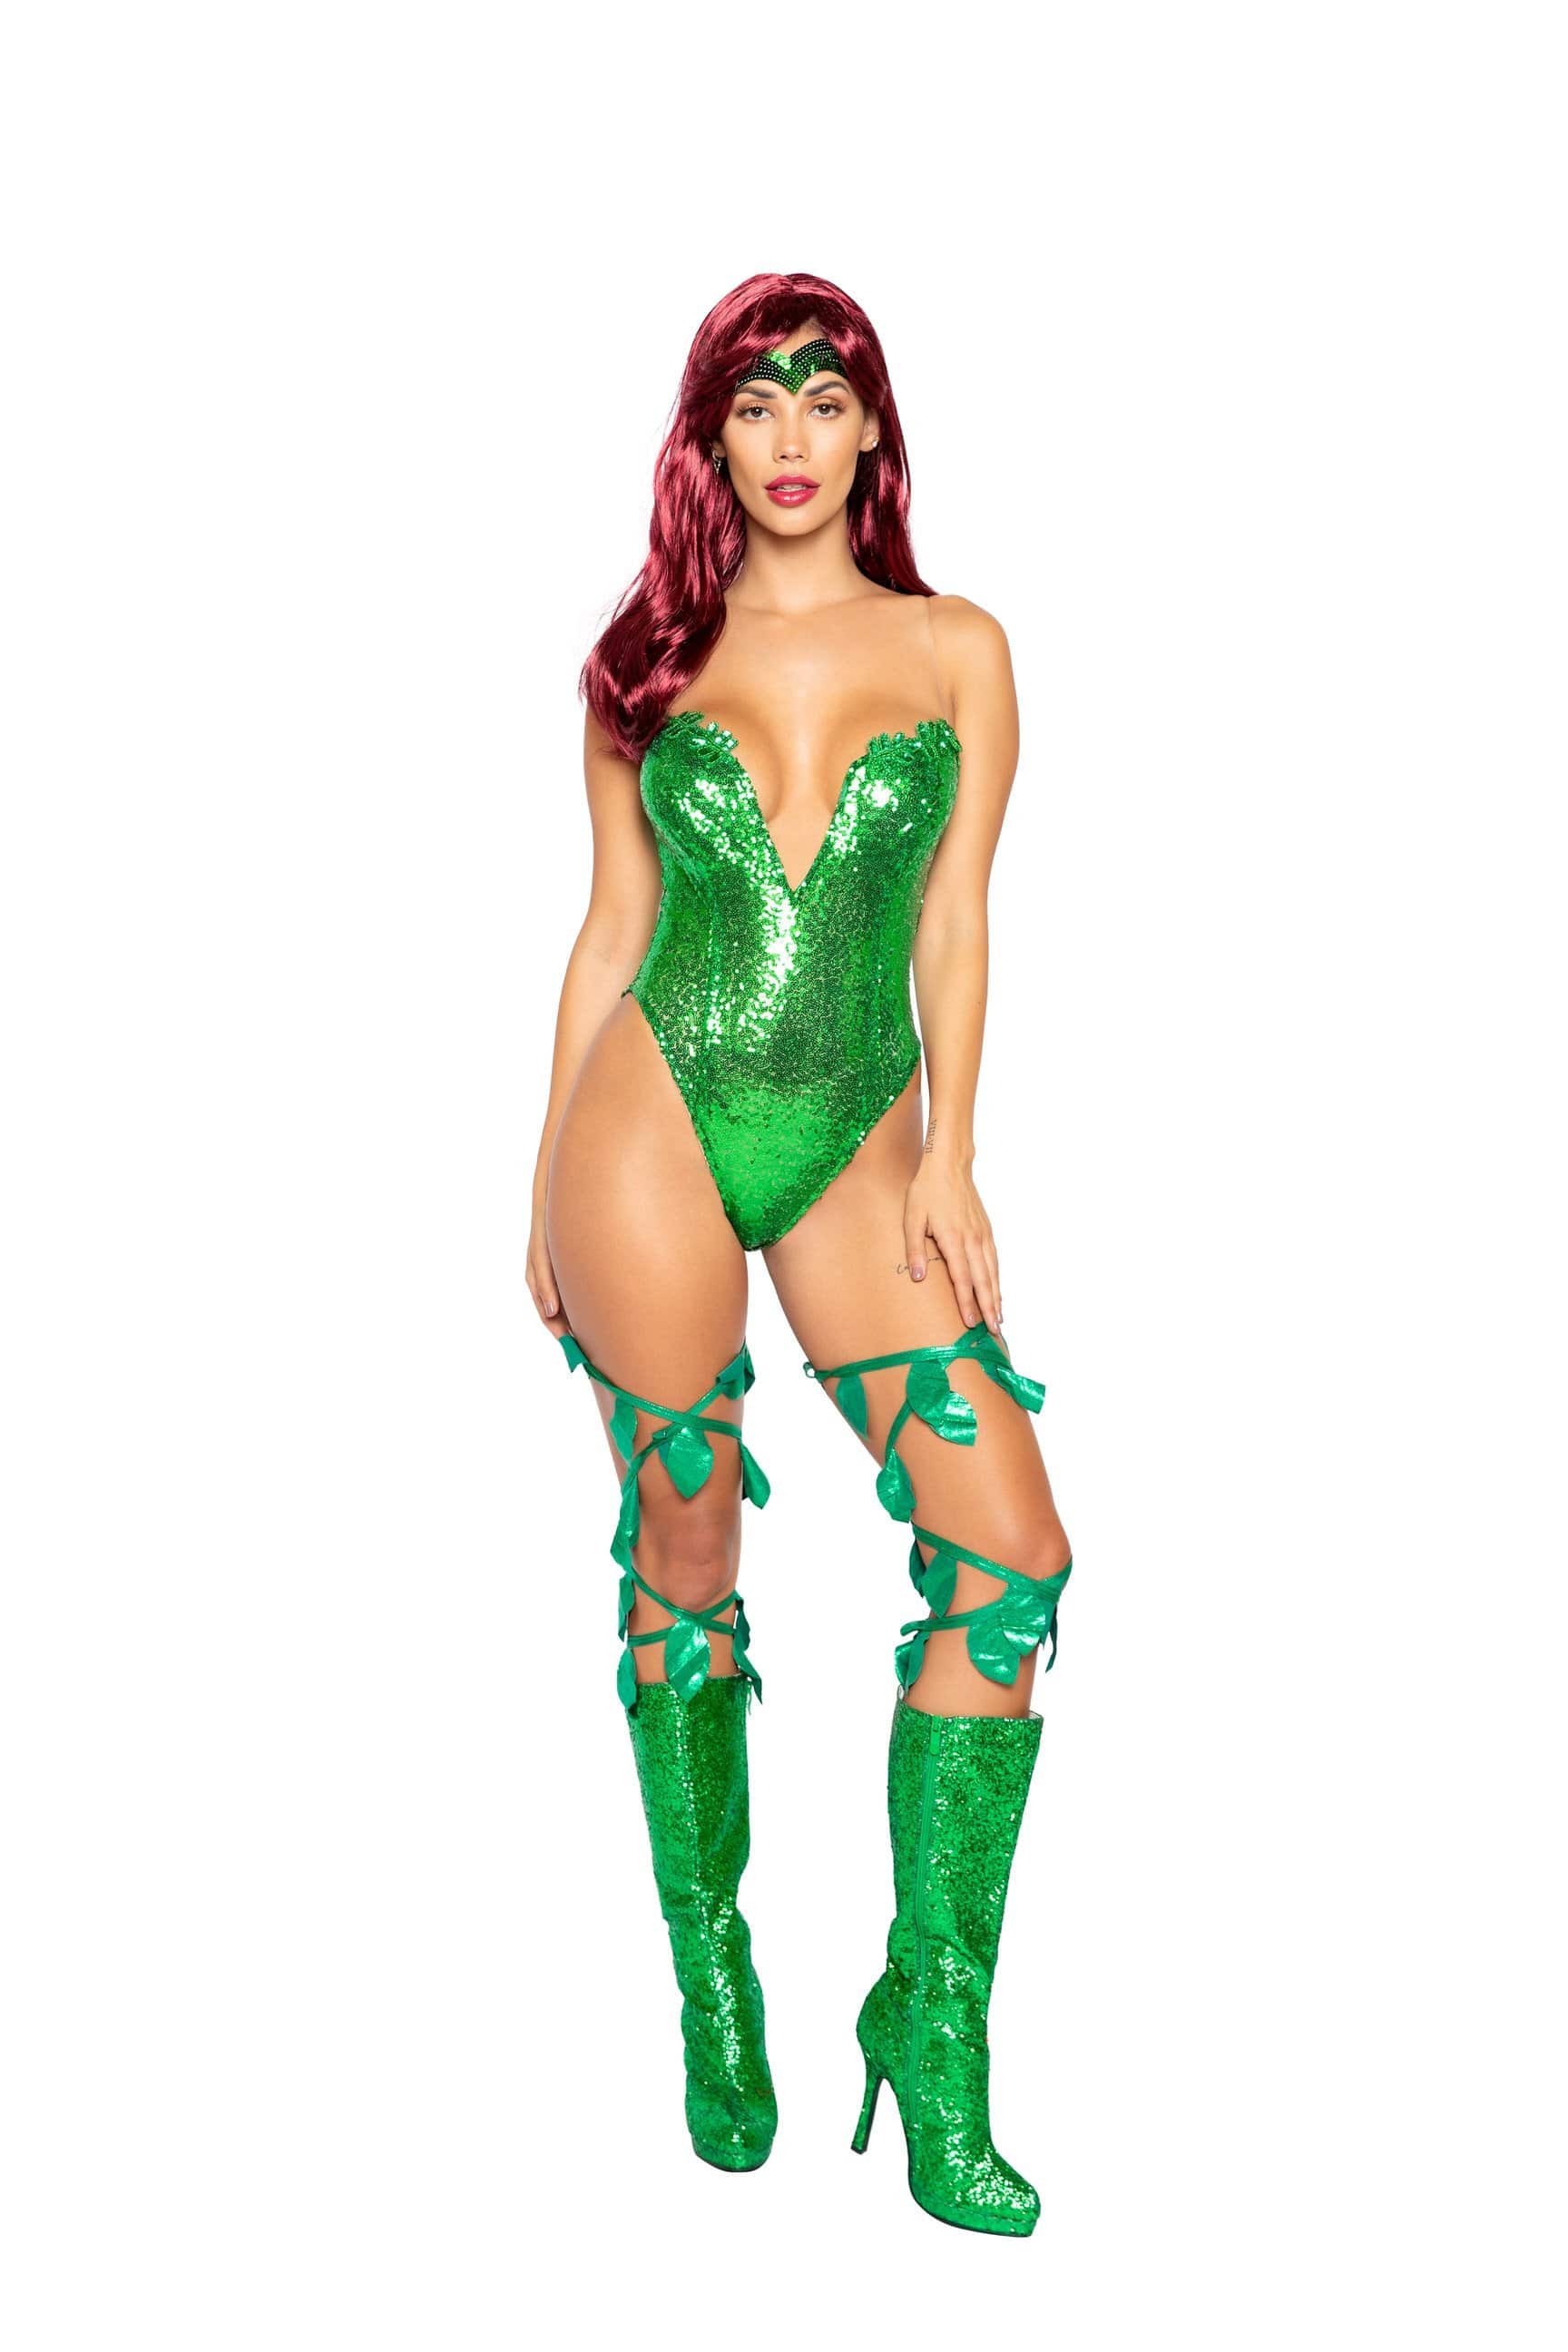 Roma Small / Green 2pc Poison Ivy Halloween Cosplay Costume SHC-4988-GREEN-S-R 2021 Women's Poison Ivy Halloween Roma Cosplay Costume 4988 Apparel & Accessories > Costumes & Accessories